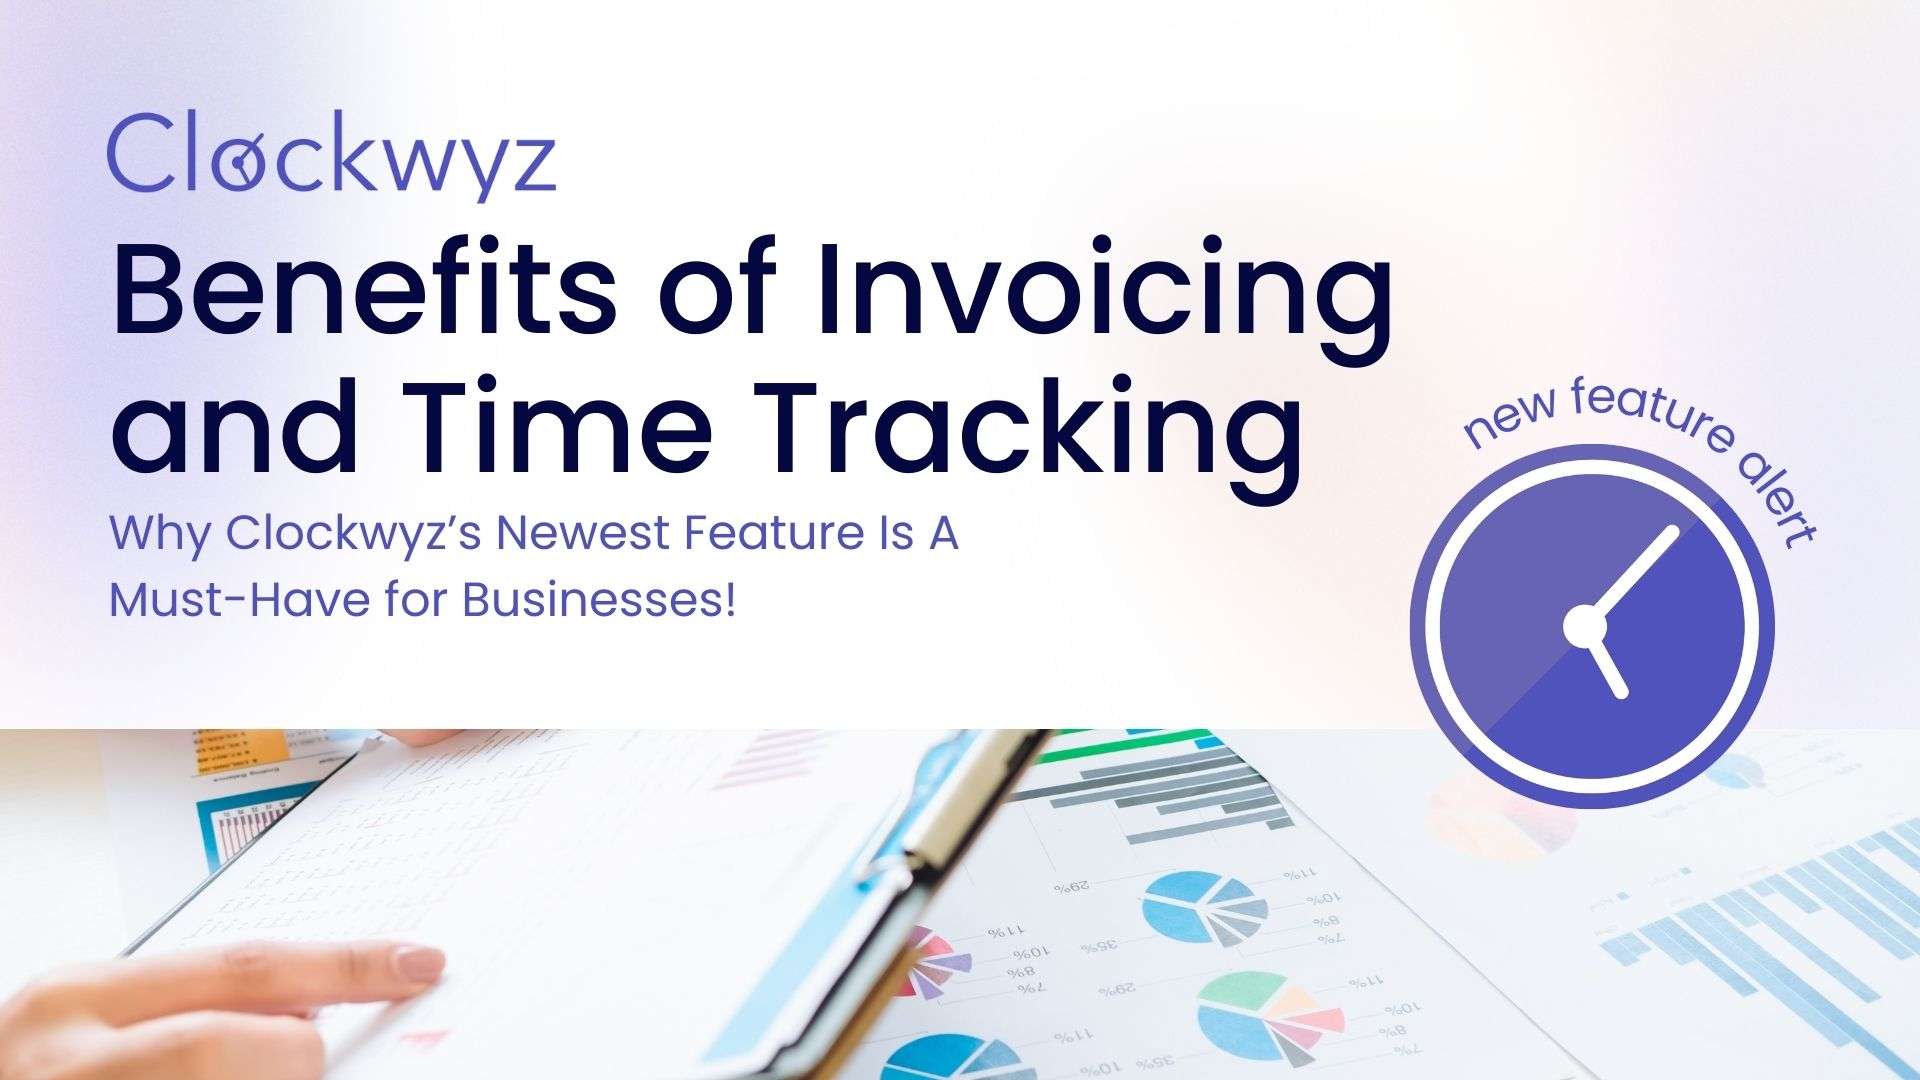 Benefits of Invoicing and Time Tracking: Why Clockwyz’s Newest Feature Is A Must-Have for Businesses!